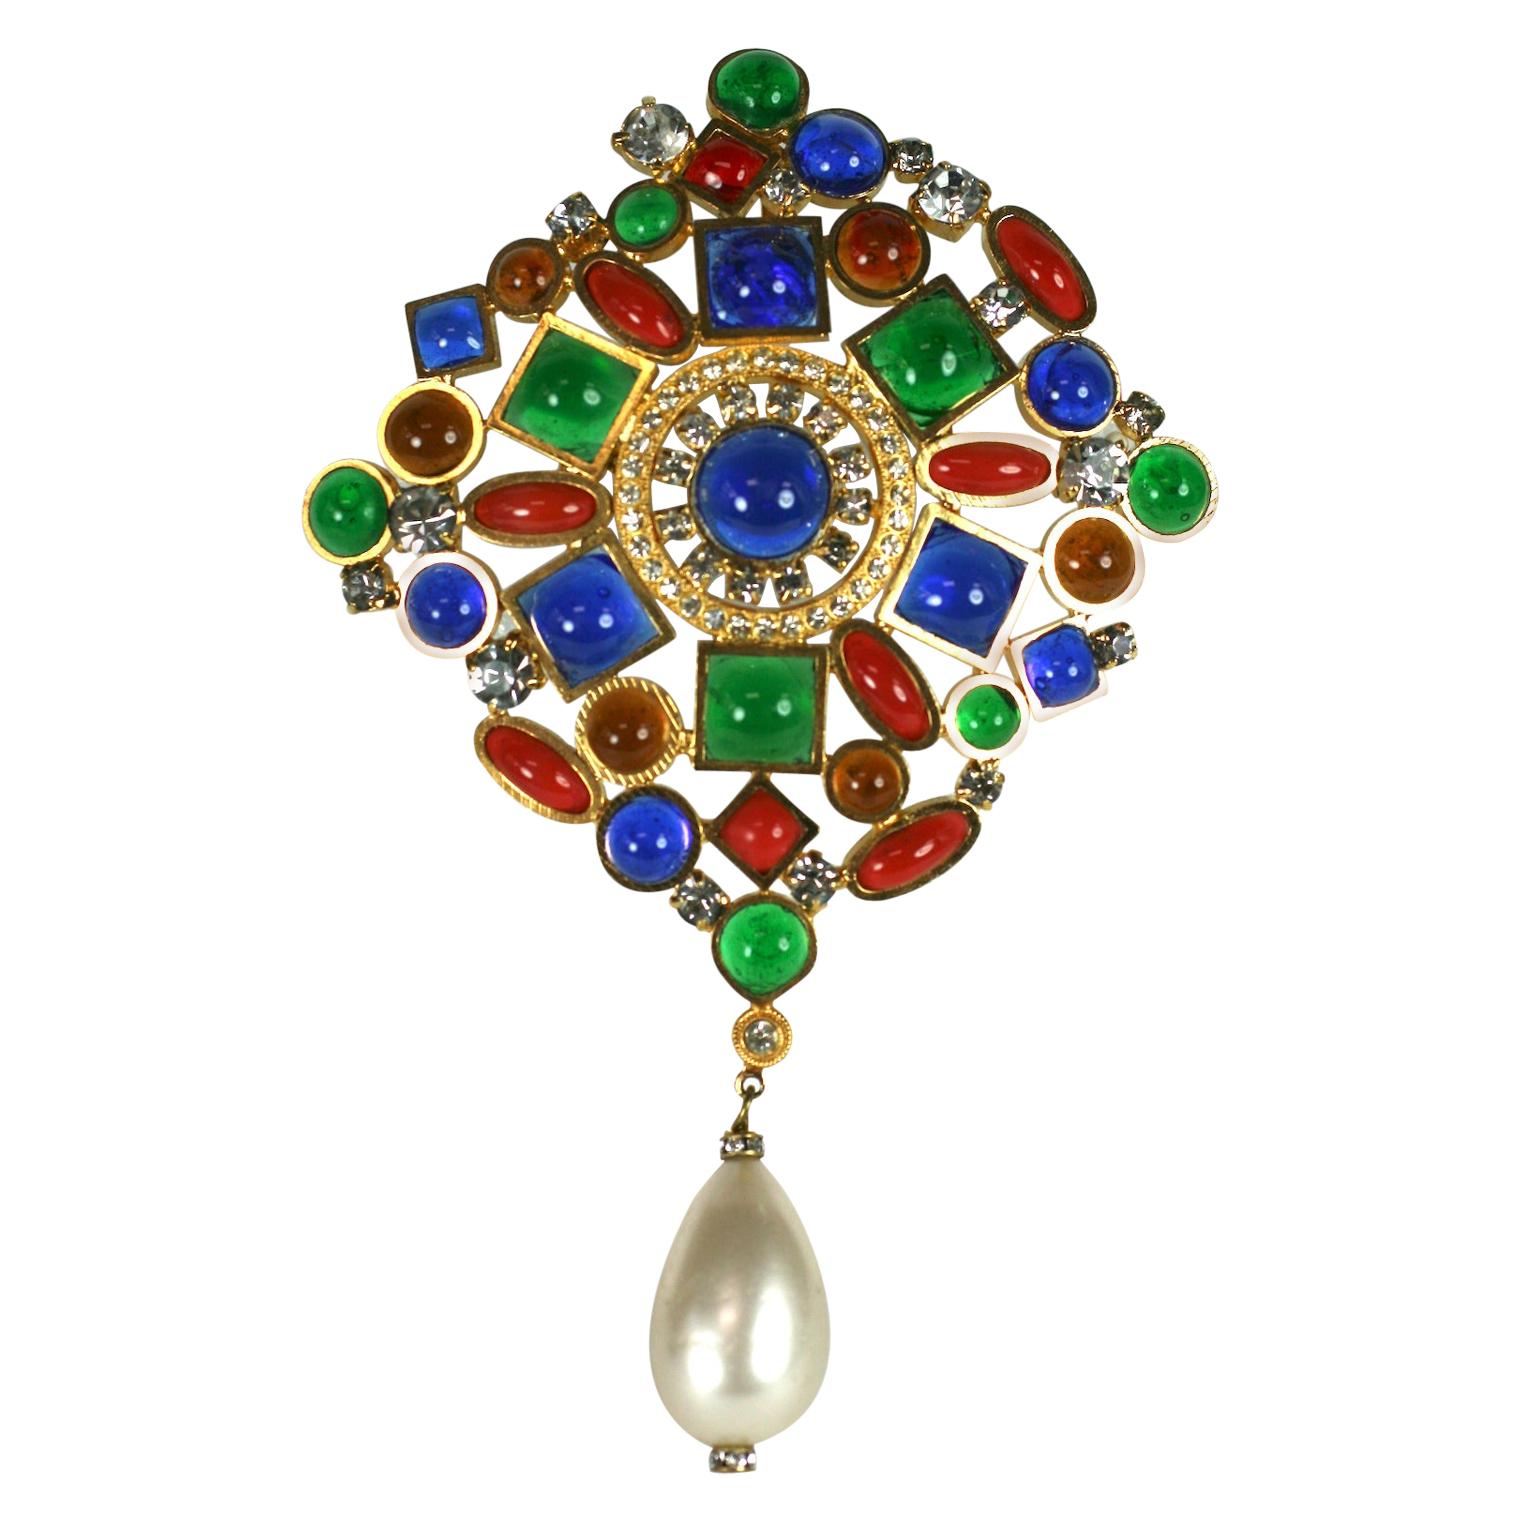  Maison Gripoix  for Chanel Large Multi Colored  Crest Brooch, France 